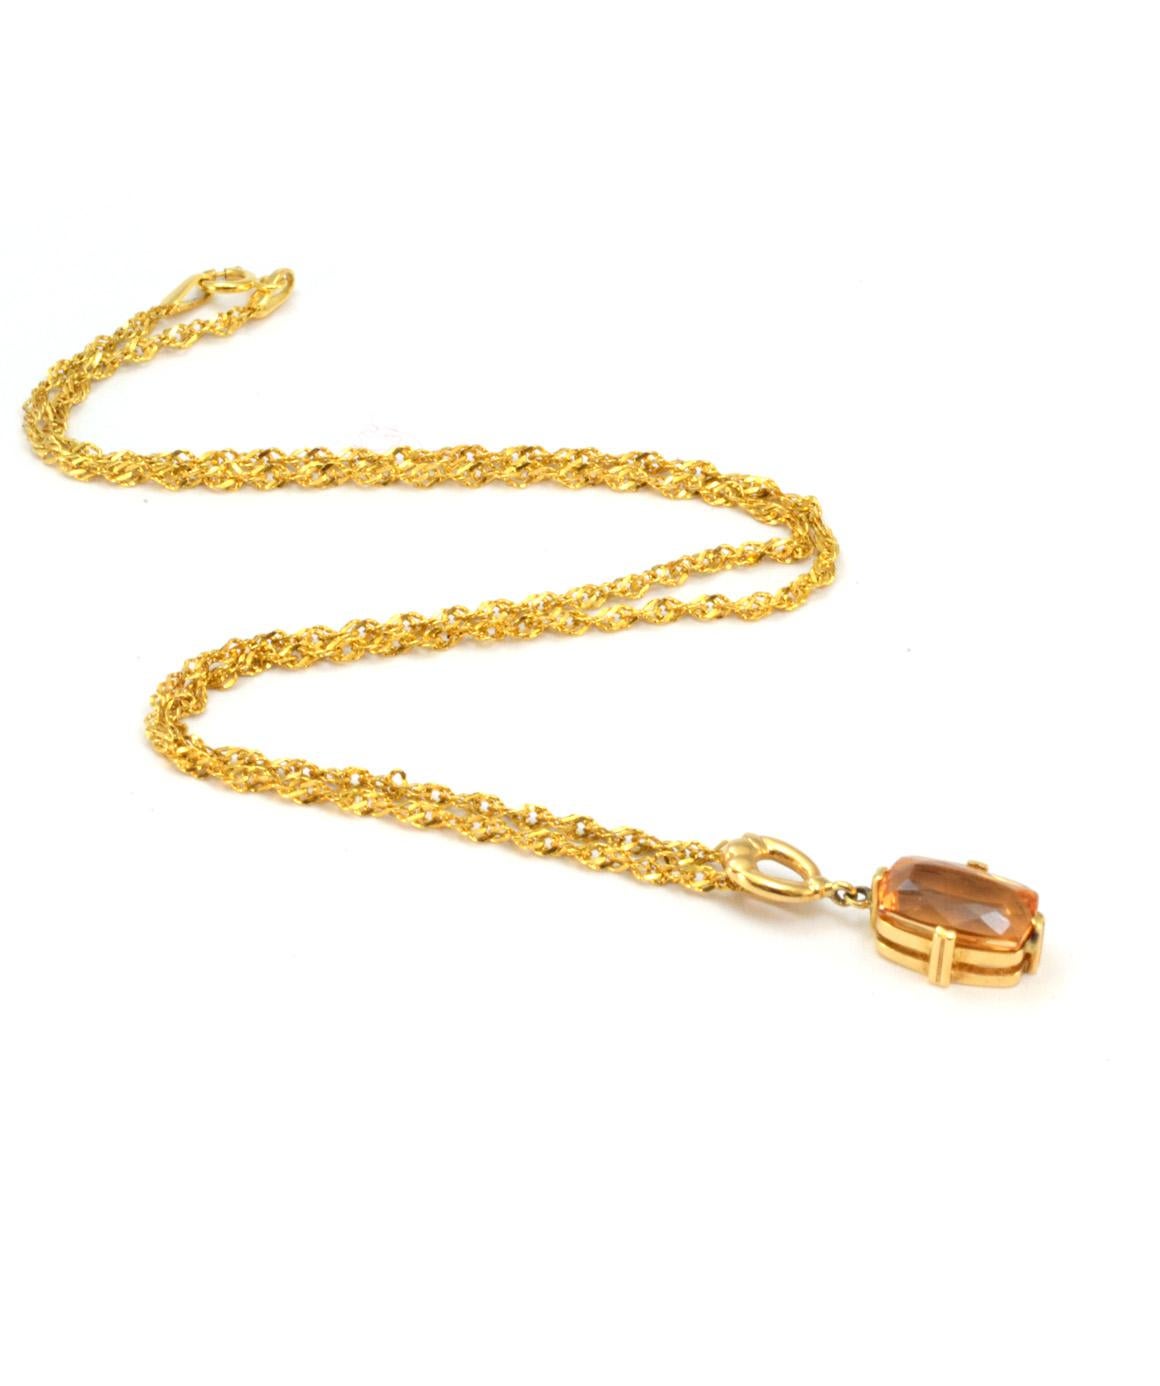 Solid 14K Yellow Gold Imperial Topaz Necklace Excellent Condition! The chain on this necklace measures about 16